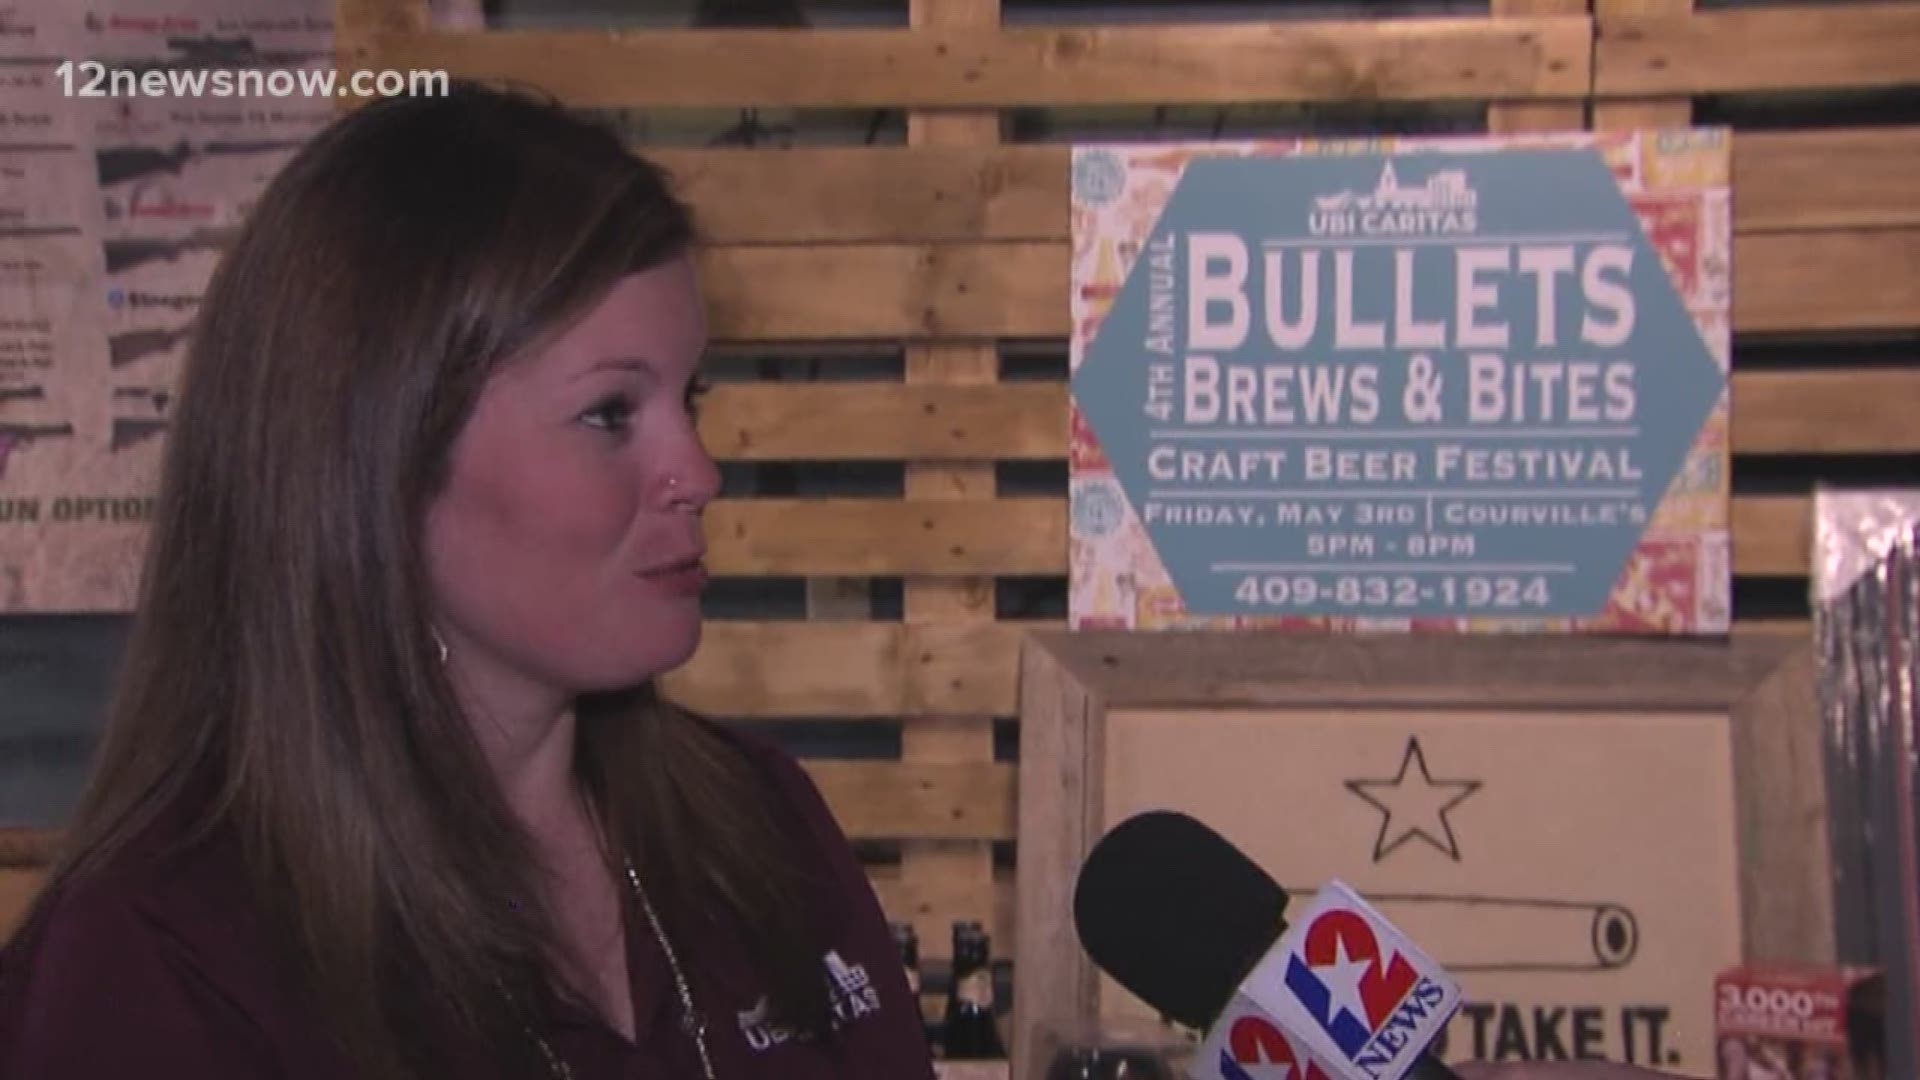 The annual Bullets, Brews and Bites Craft Beer Festival is 5 p.m. Friday, May 3 at Courville's. The event is hosted by local non profit Ubi Caritas.